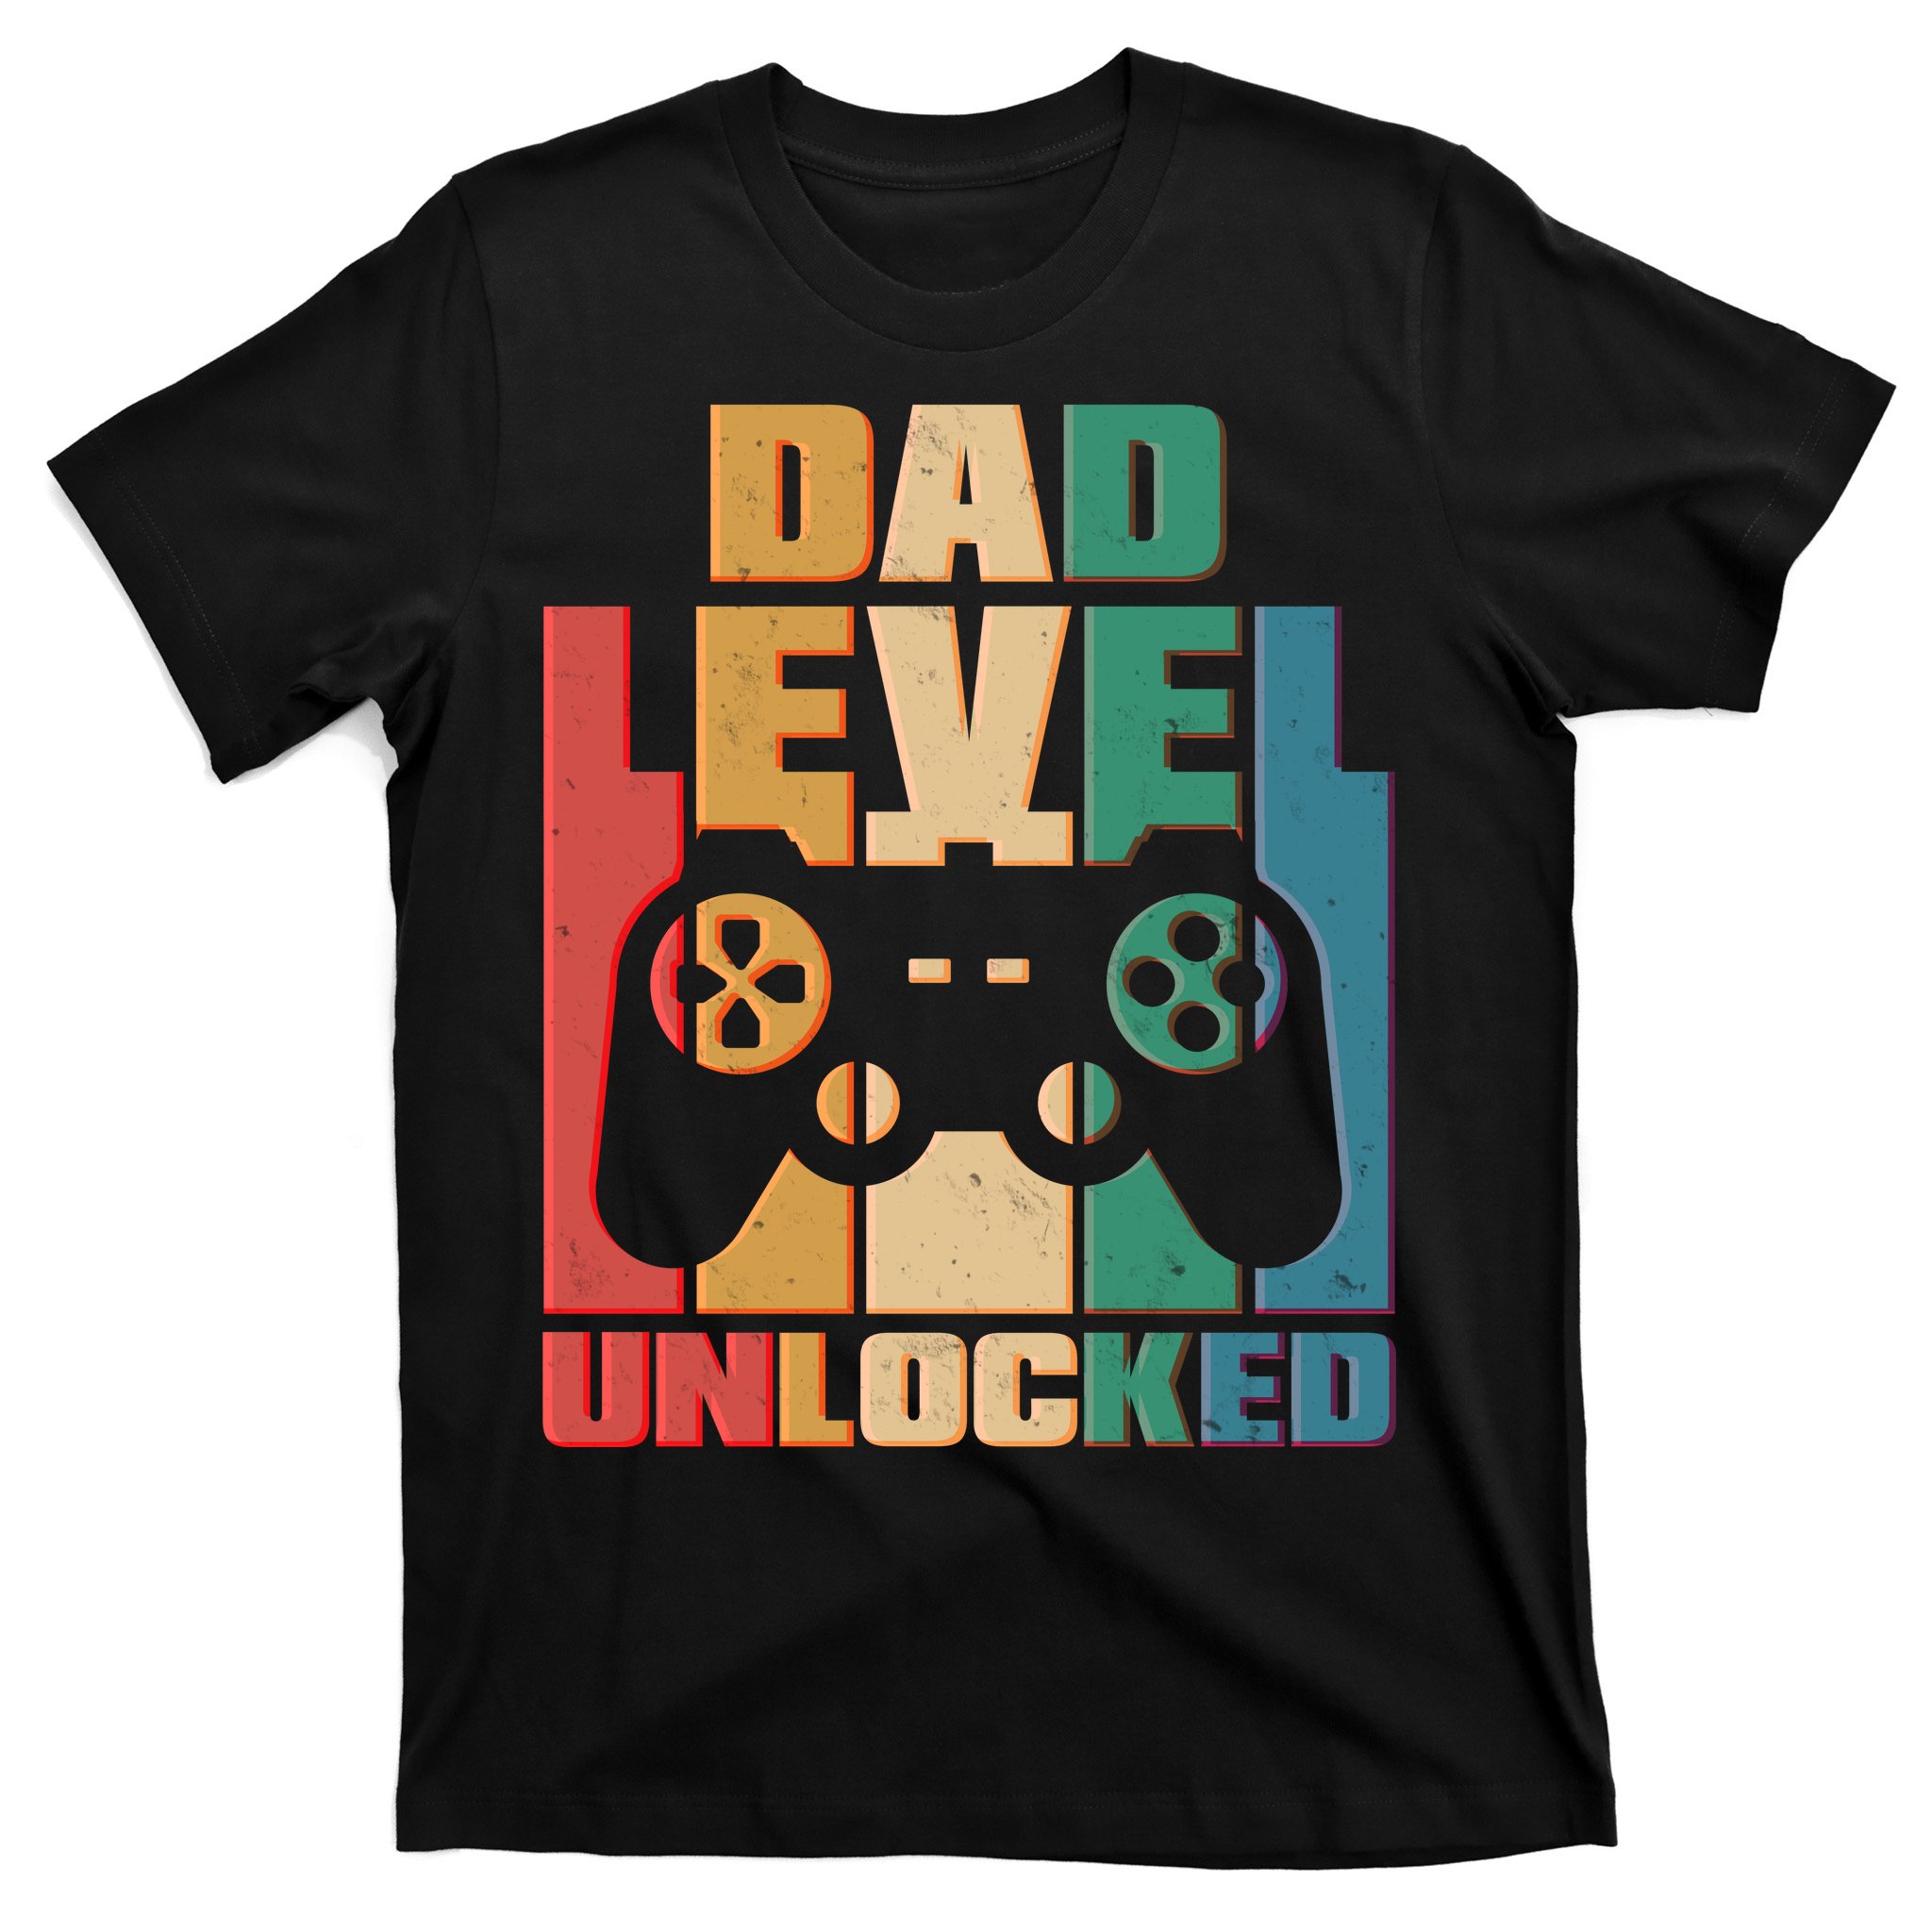 New Dad T-Shirt Gamer Father Shirt Dad Level Unlocked Tee Gift for Fathers Navy Blue